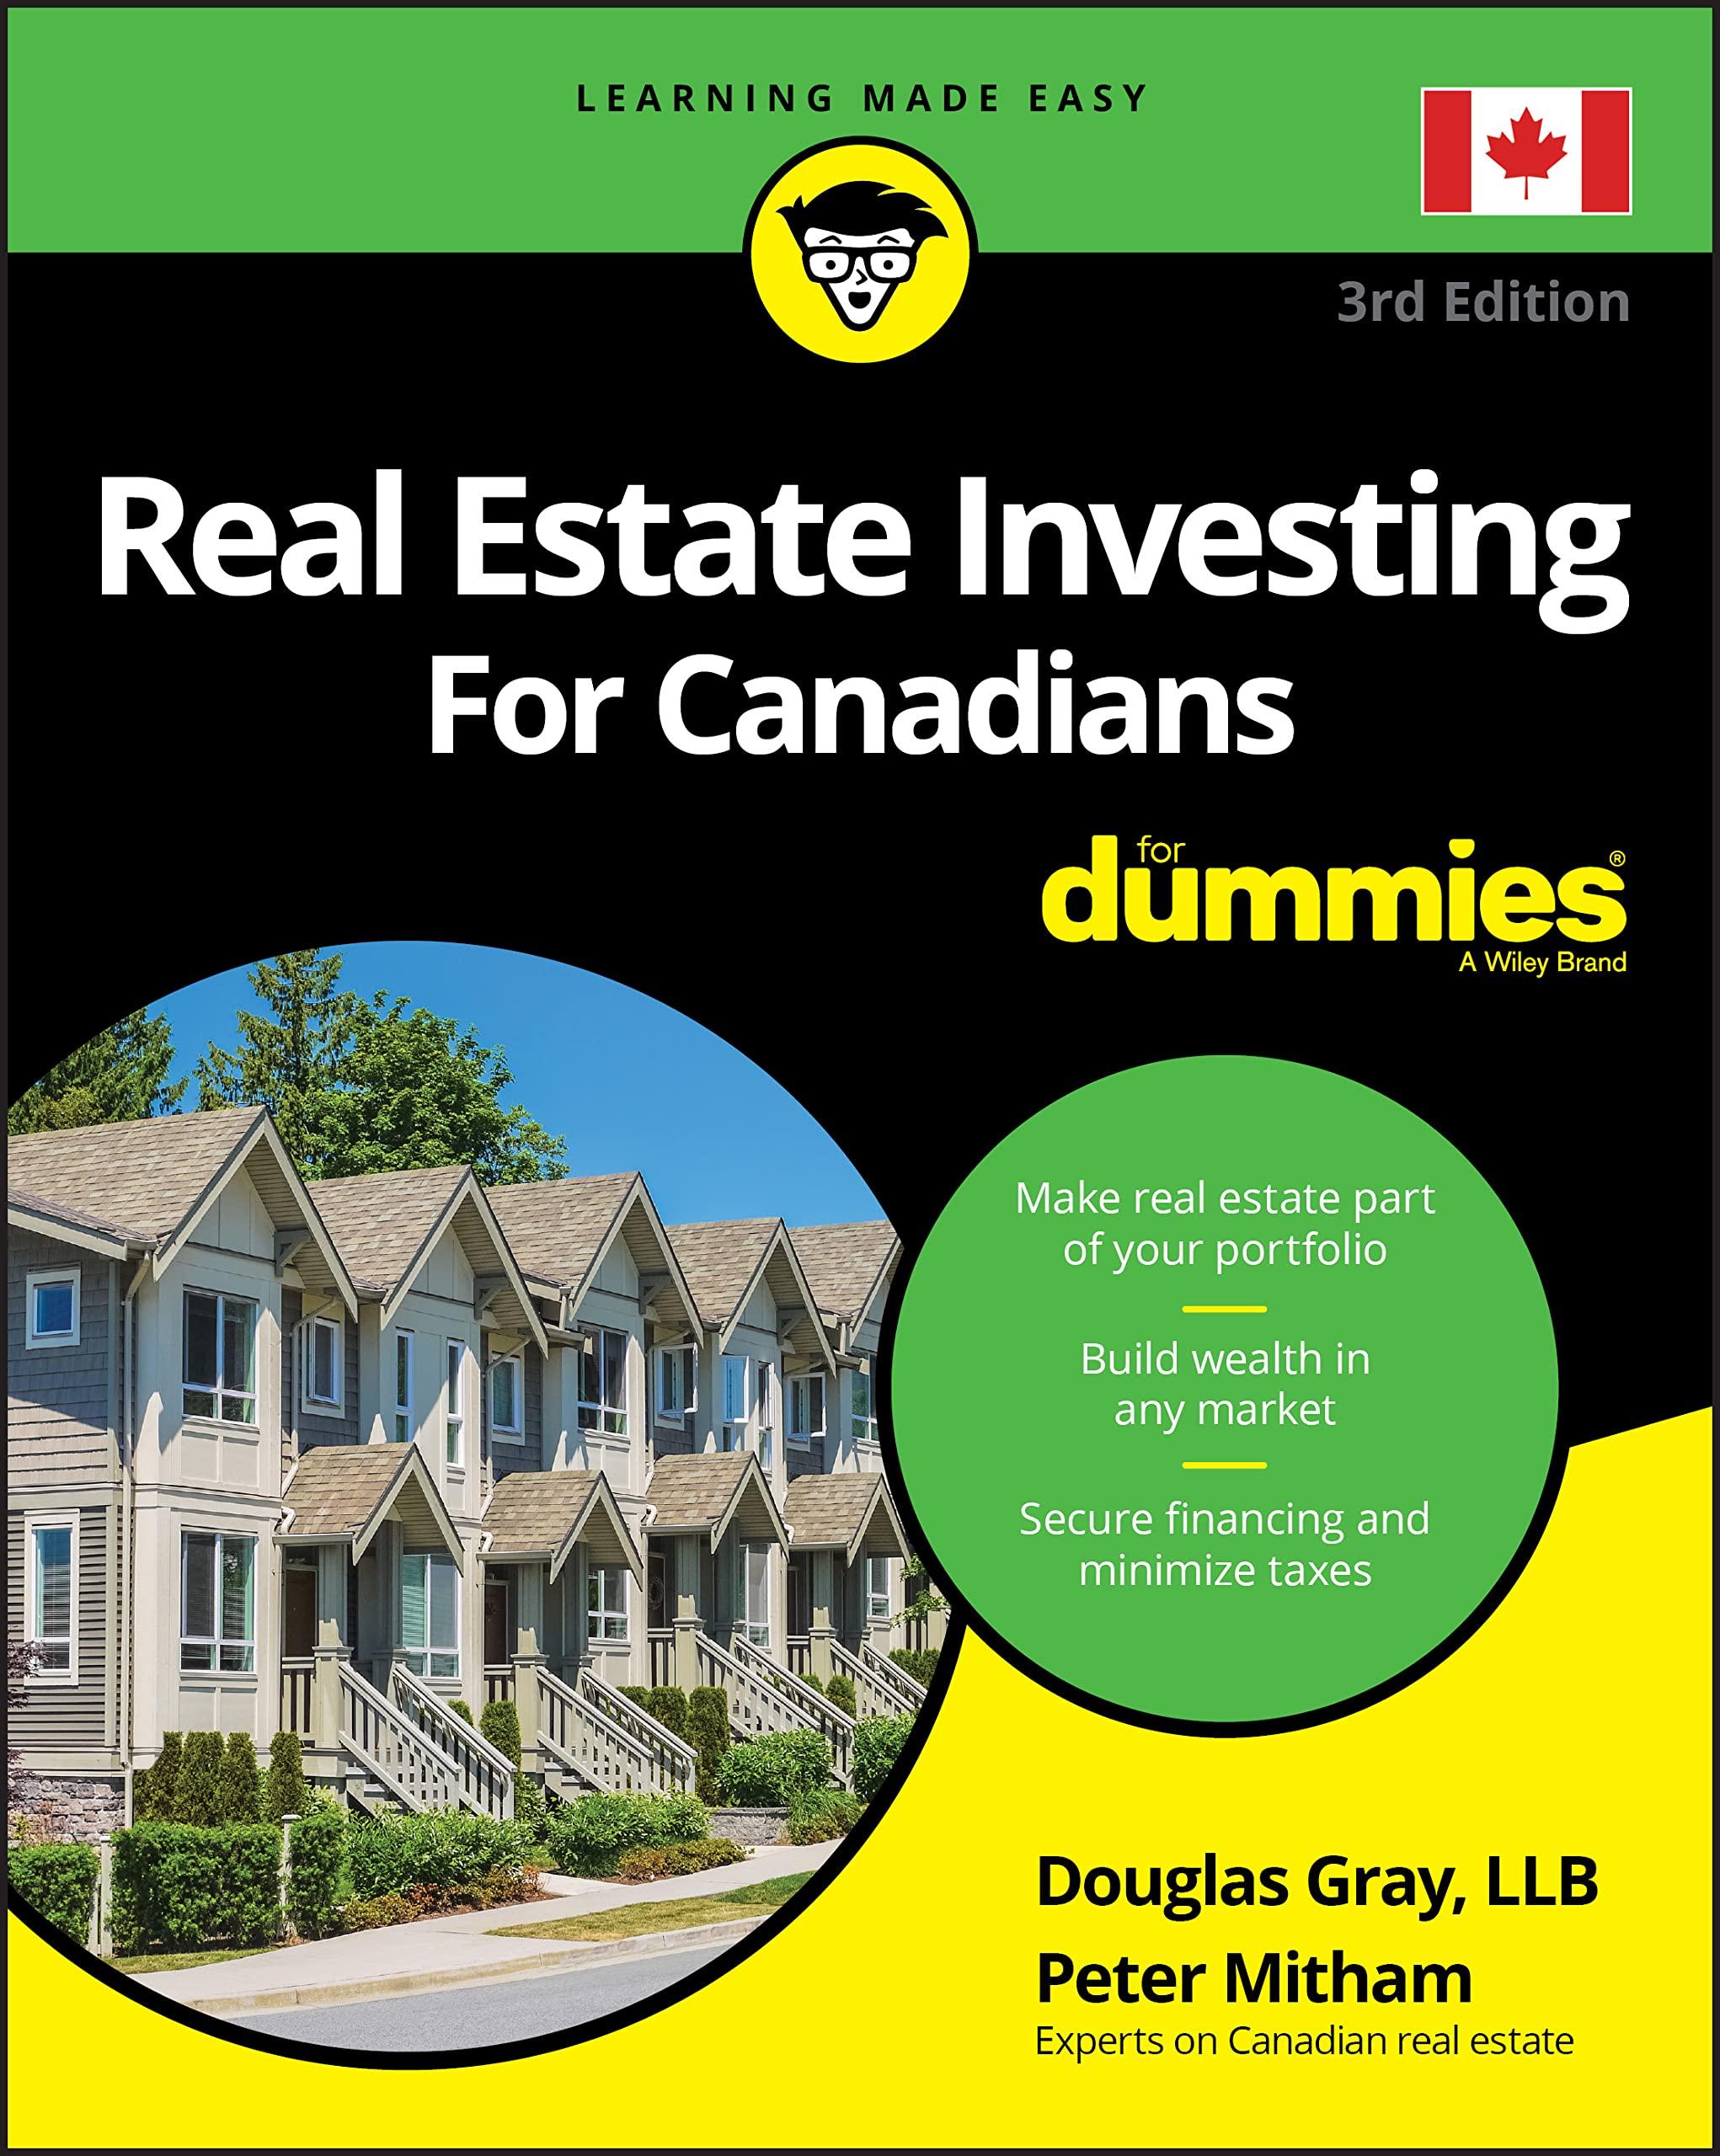 real estate investing for canadians for dummies 3rd edition peter mitham, douglas gray 1119648424,